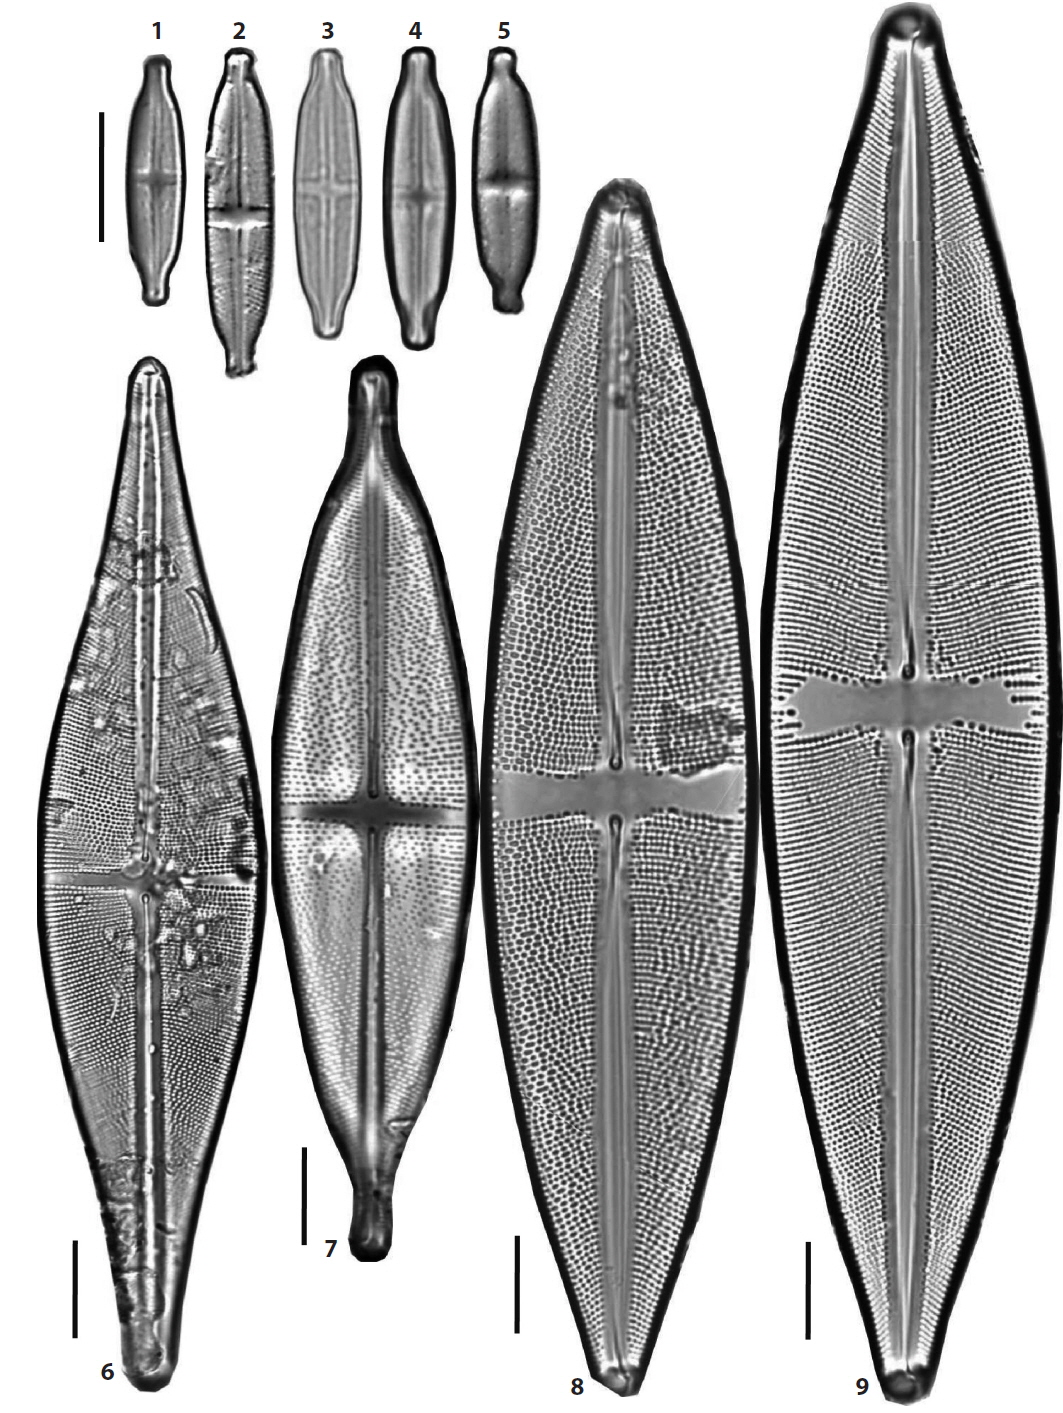 Figs. 1？5. Stauroneis kriegeri, Fig. 6. S. alabamae, Fig. 7. S. nobilis, Figs. 8, 9. S. sonya. Scale bars, 10 μm (×1500 magnification in Figs. 6？9 and ×2000 in others).